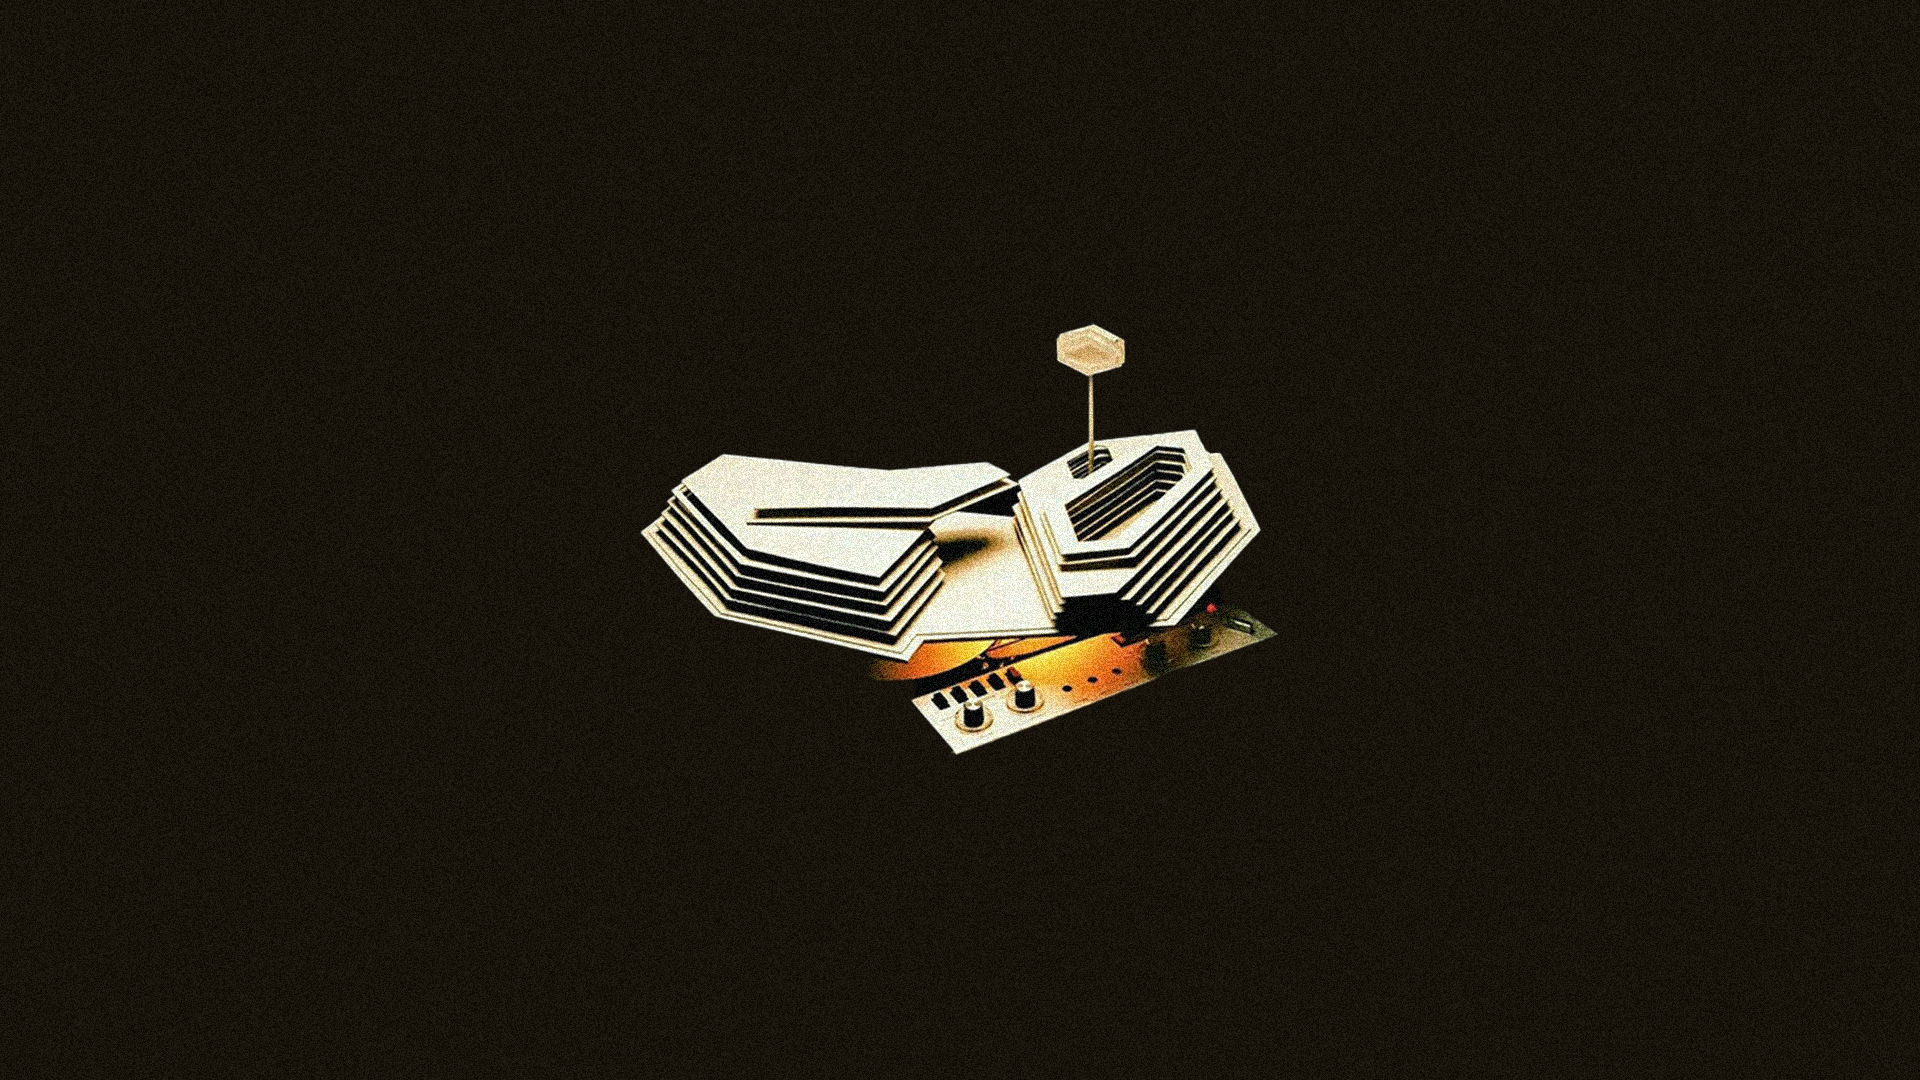 Tranquility Base Hotel + Casino minimalist wallpaper for PC